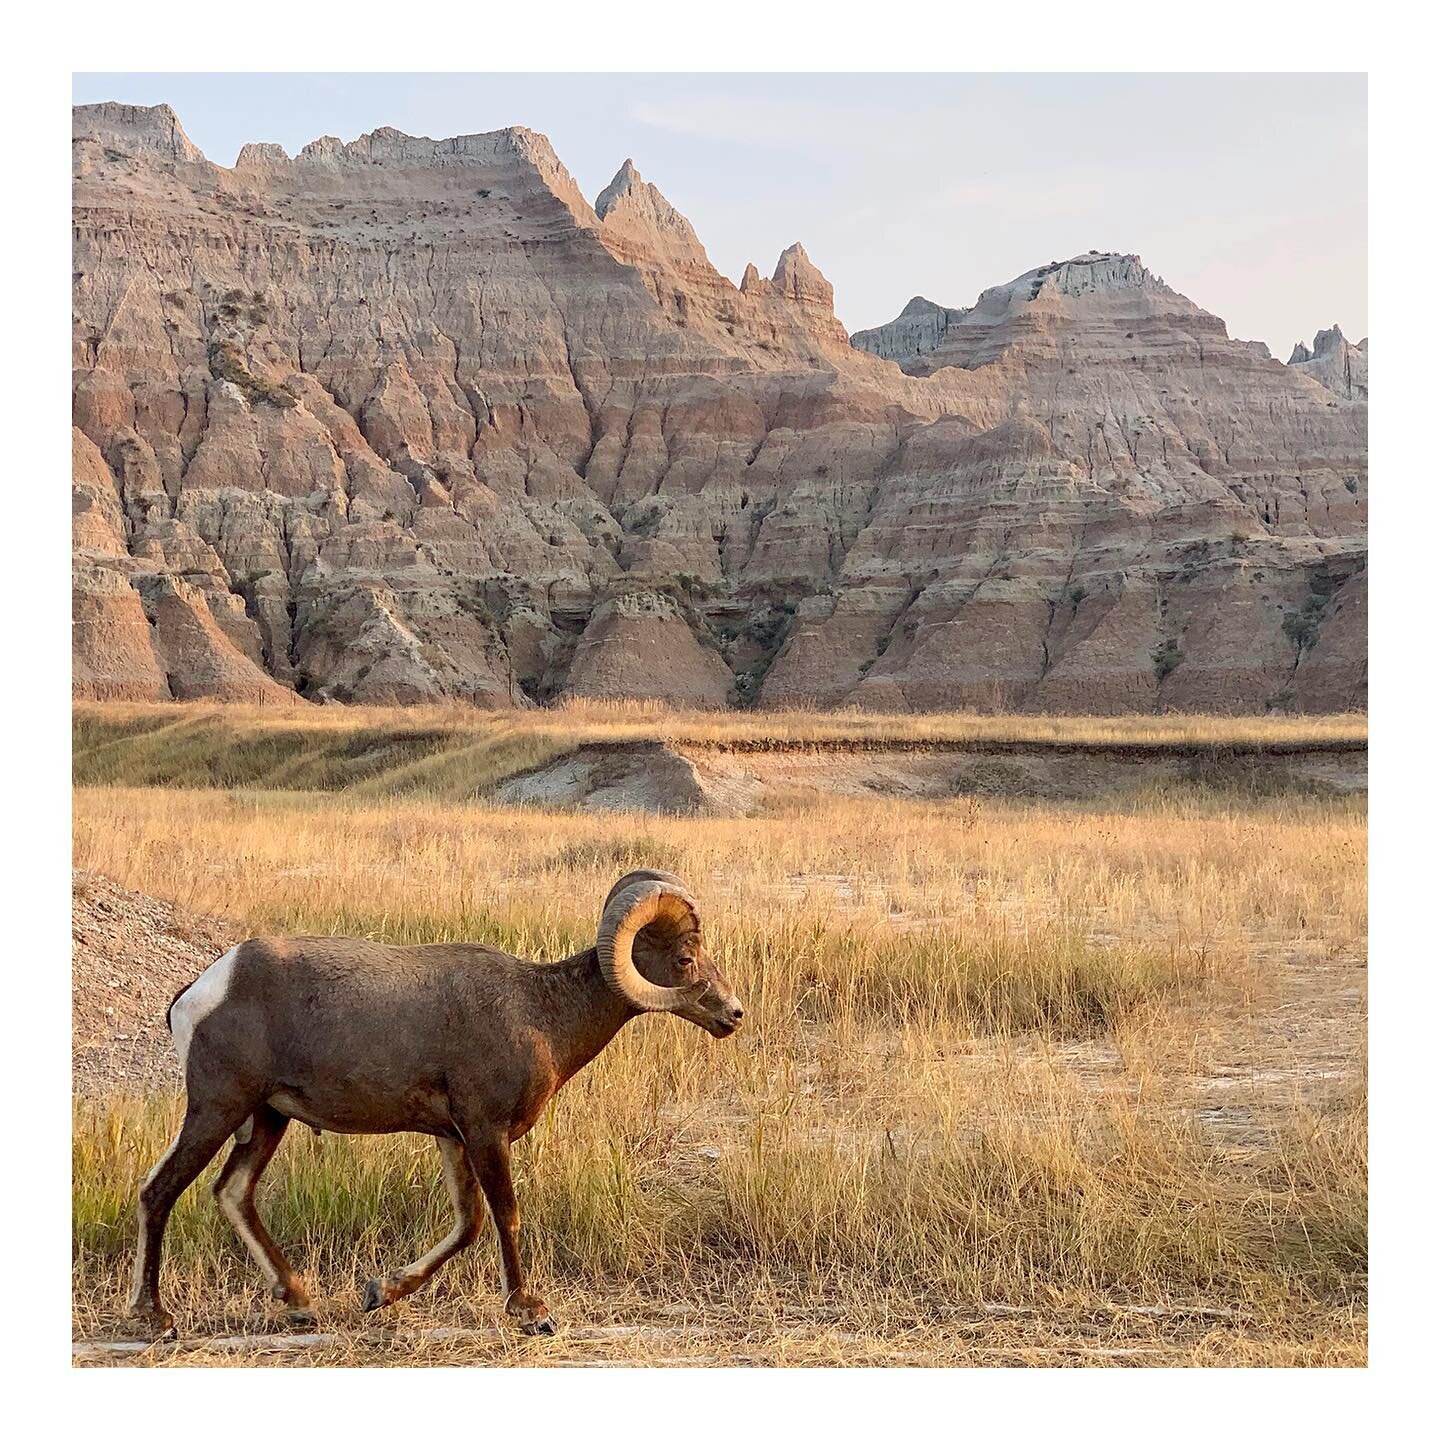 Bighorn Sheep
Badlands National Park
⛰
About 250 bighorn sheep live in the Badlands of the 80,000 still living in the U.S. today. There used to be two million! 🌏
South Dakota, Summer 2020